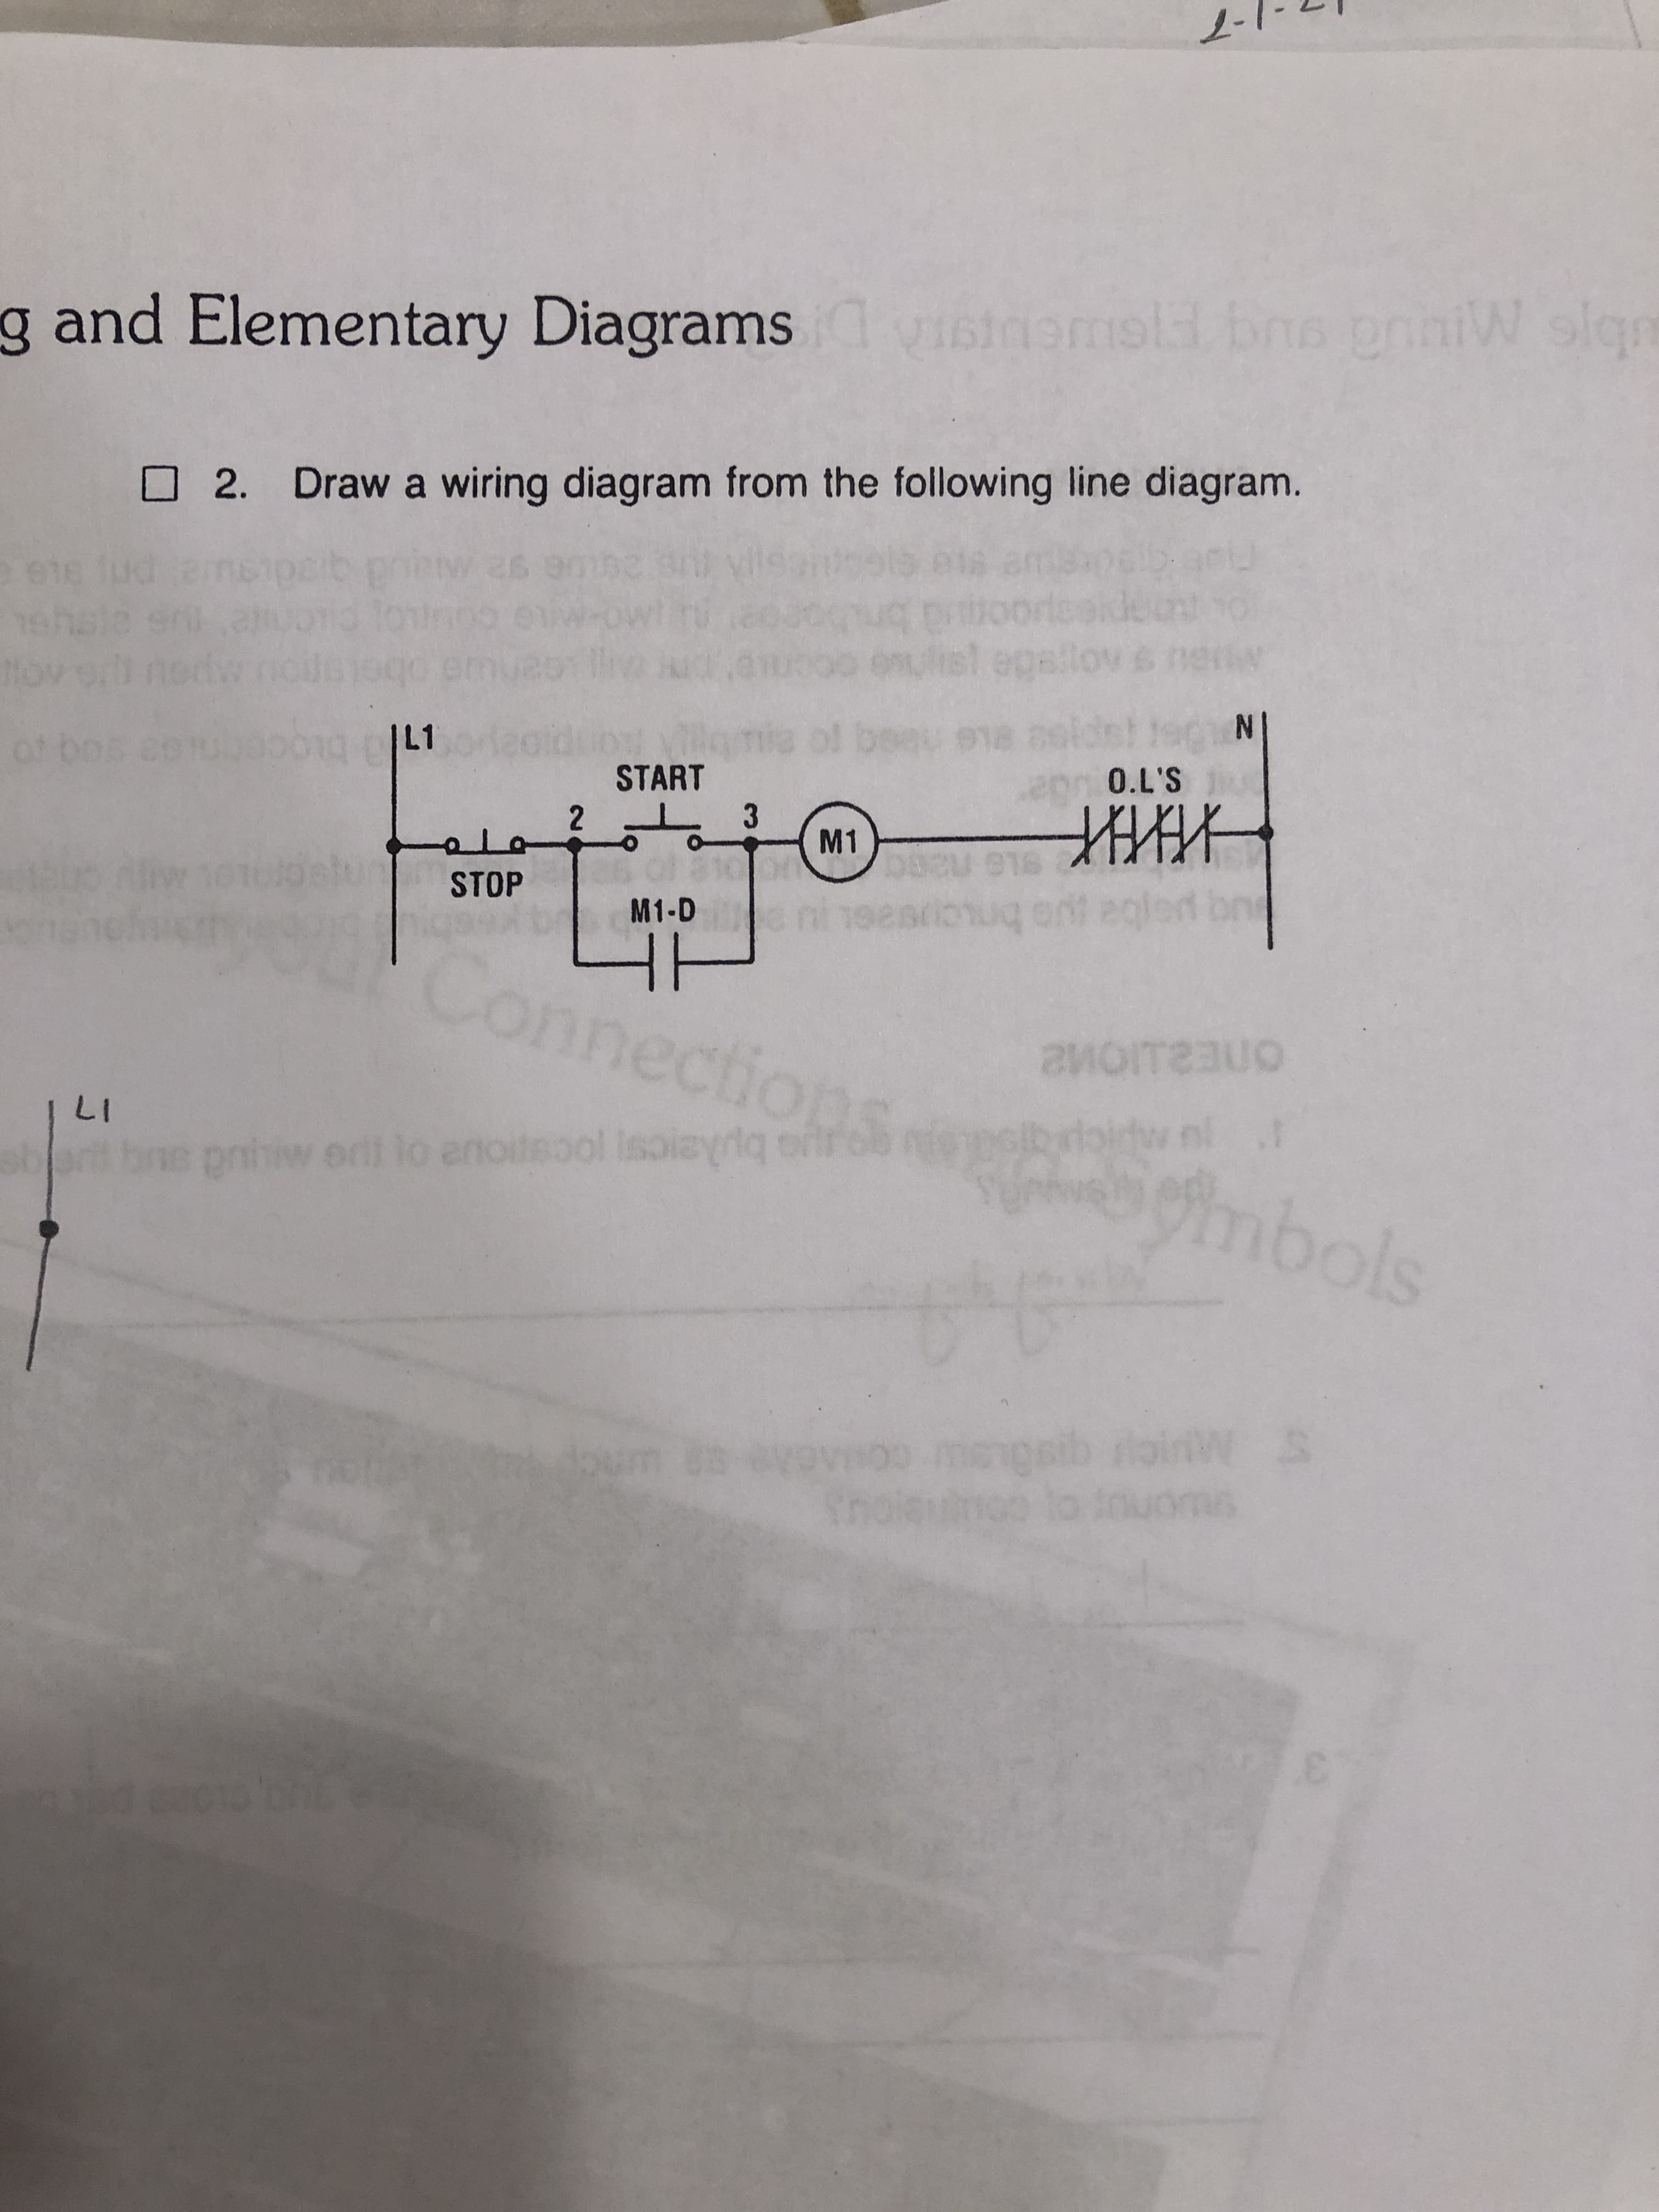 2.
-7
W slqn
FISL
g inemal bne griniW slgn
and Elementary Diagrams vist
O2. Draw a wiring diagram from the following line diagram.
epallov s
S.TO
START
M1
egled bne
bnuous
STOP
M1-D G
Connection
mbols
bukaics jocspoue of e ud aug e
17
S MHCU
